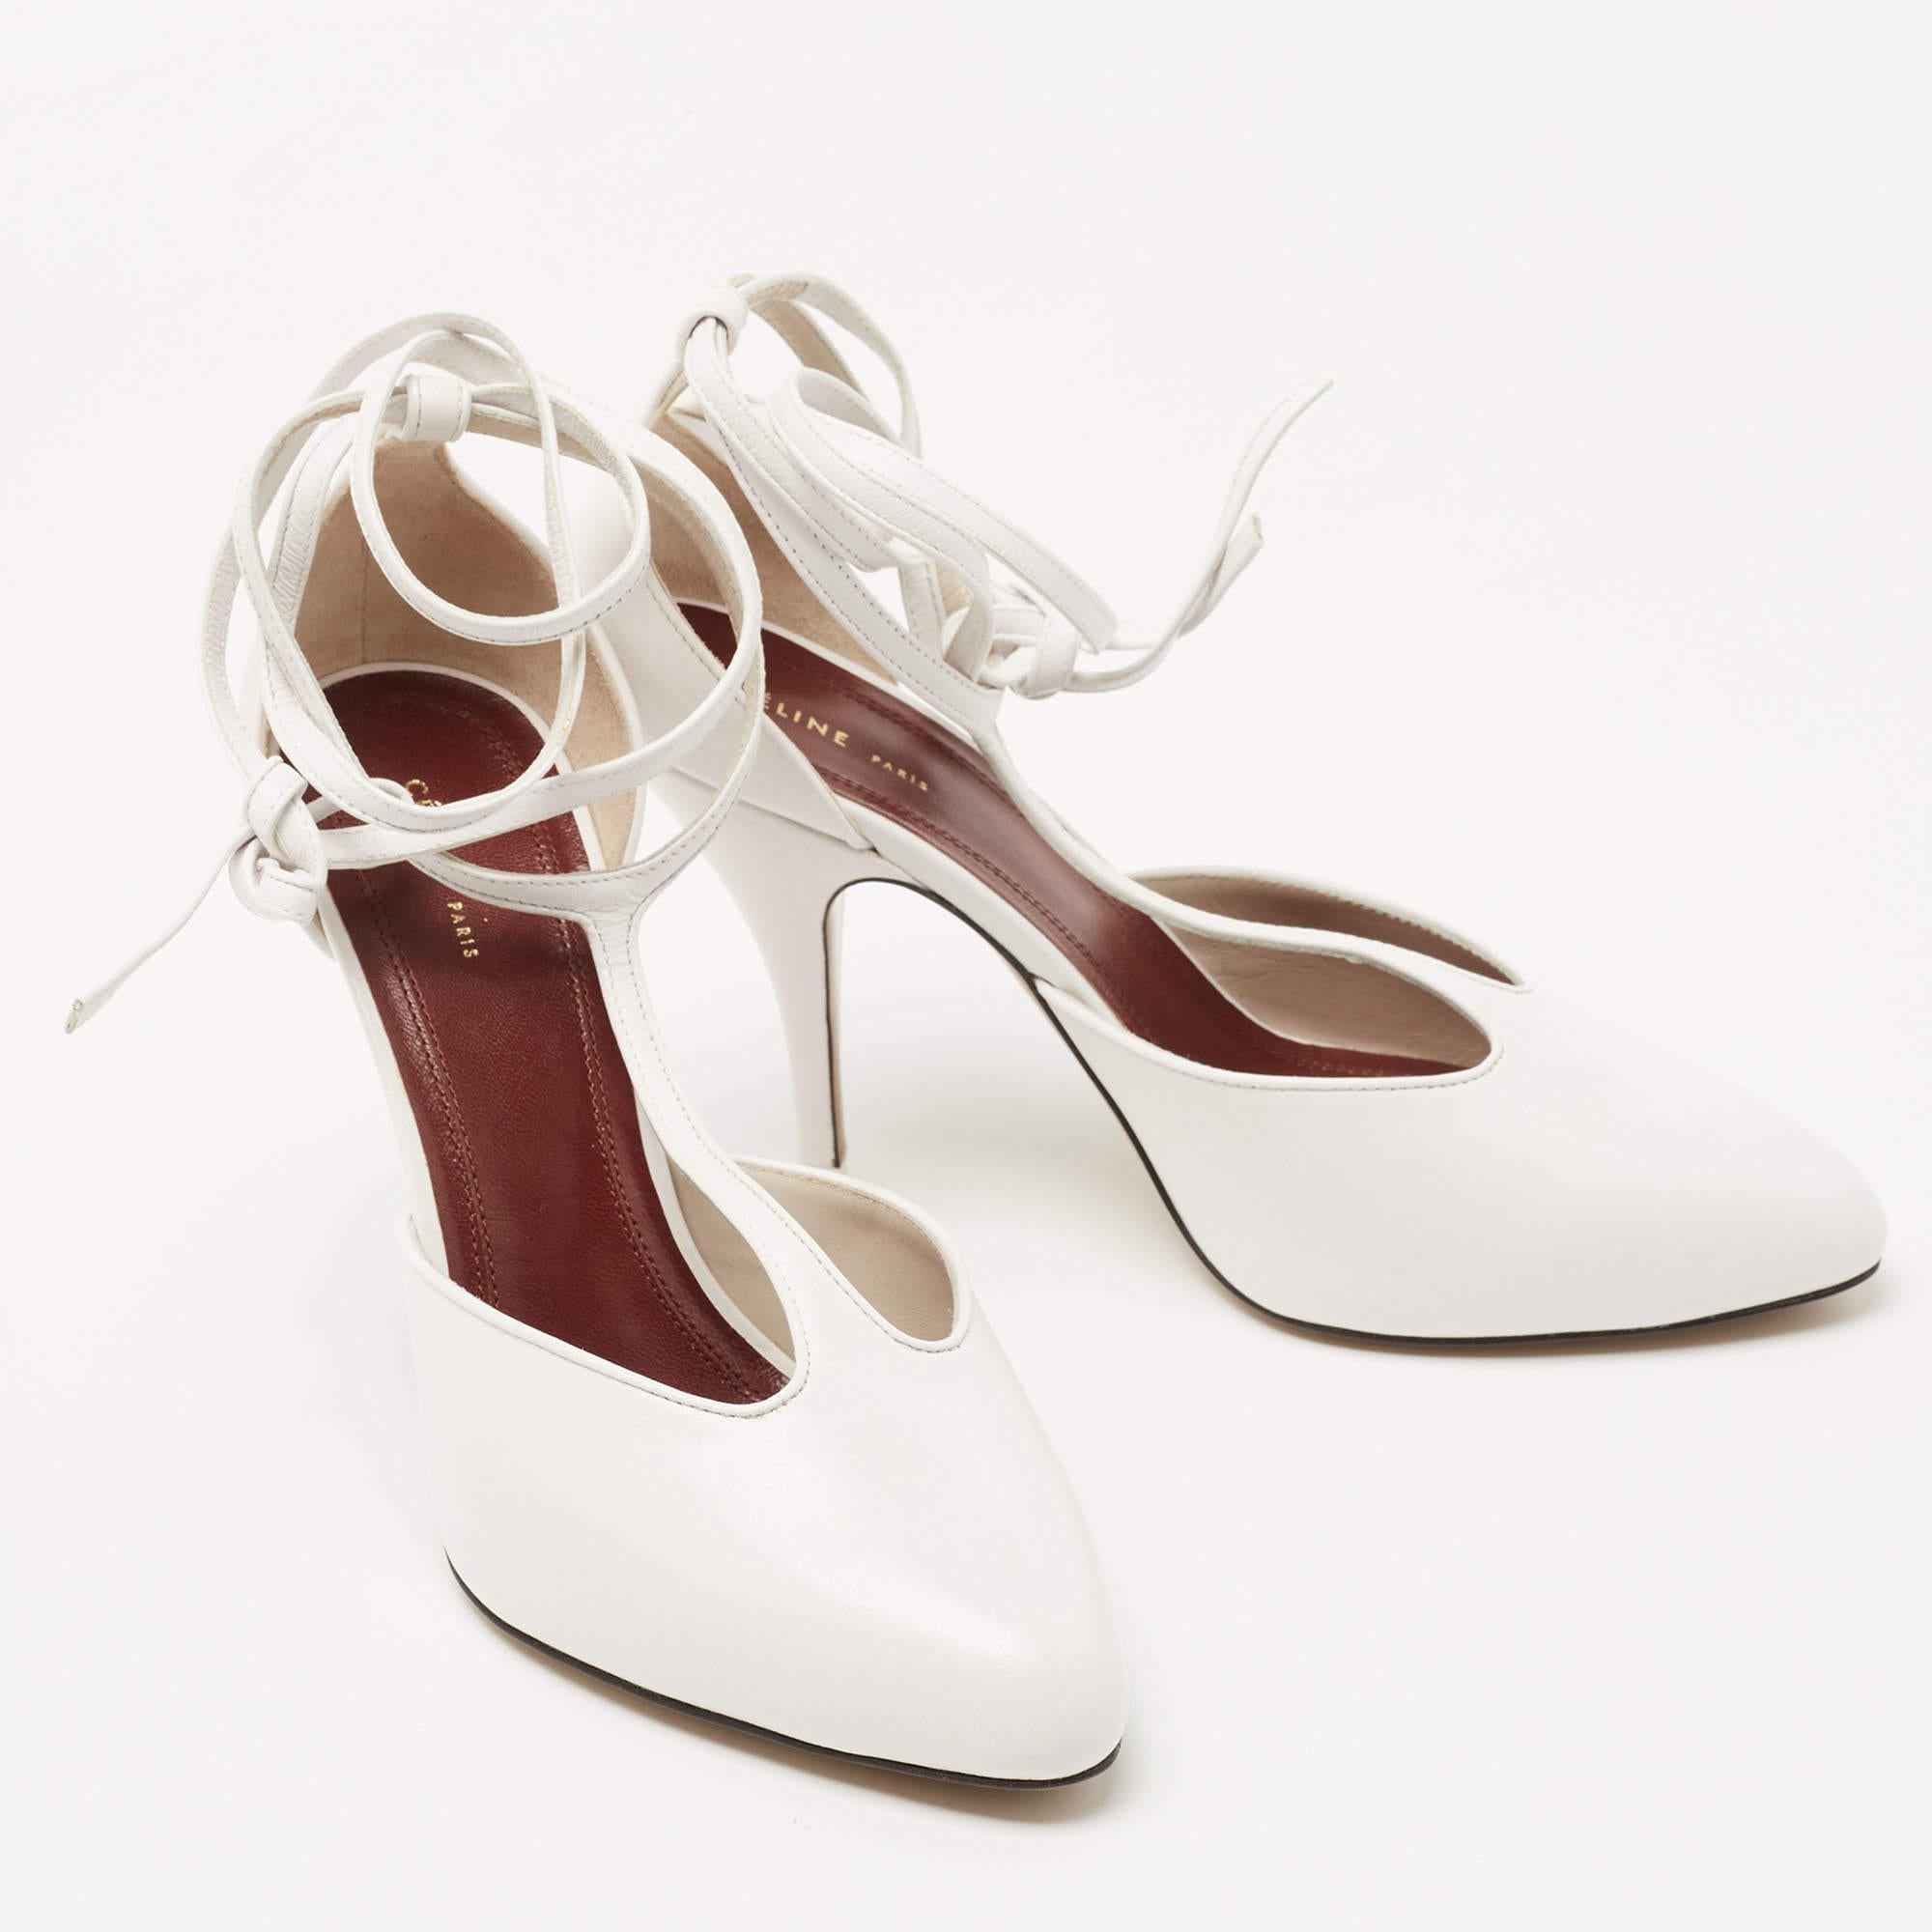 Pair that feminine dress of yours with these stunning Celine sandals and get set to get never-ending compliments! These white sandals are crafted from leather and feature an almond-toe silhouette. They flaunt a T-strap design with ankle